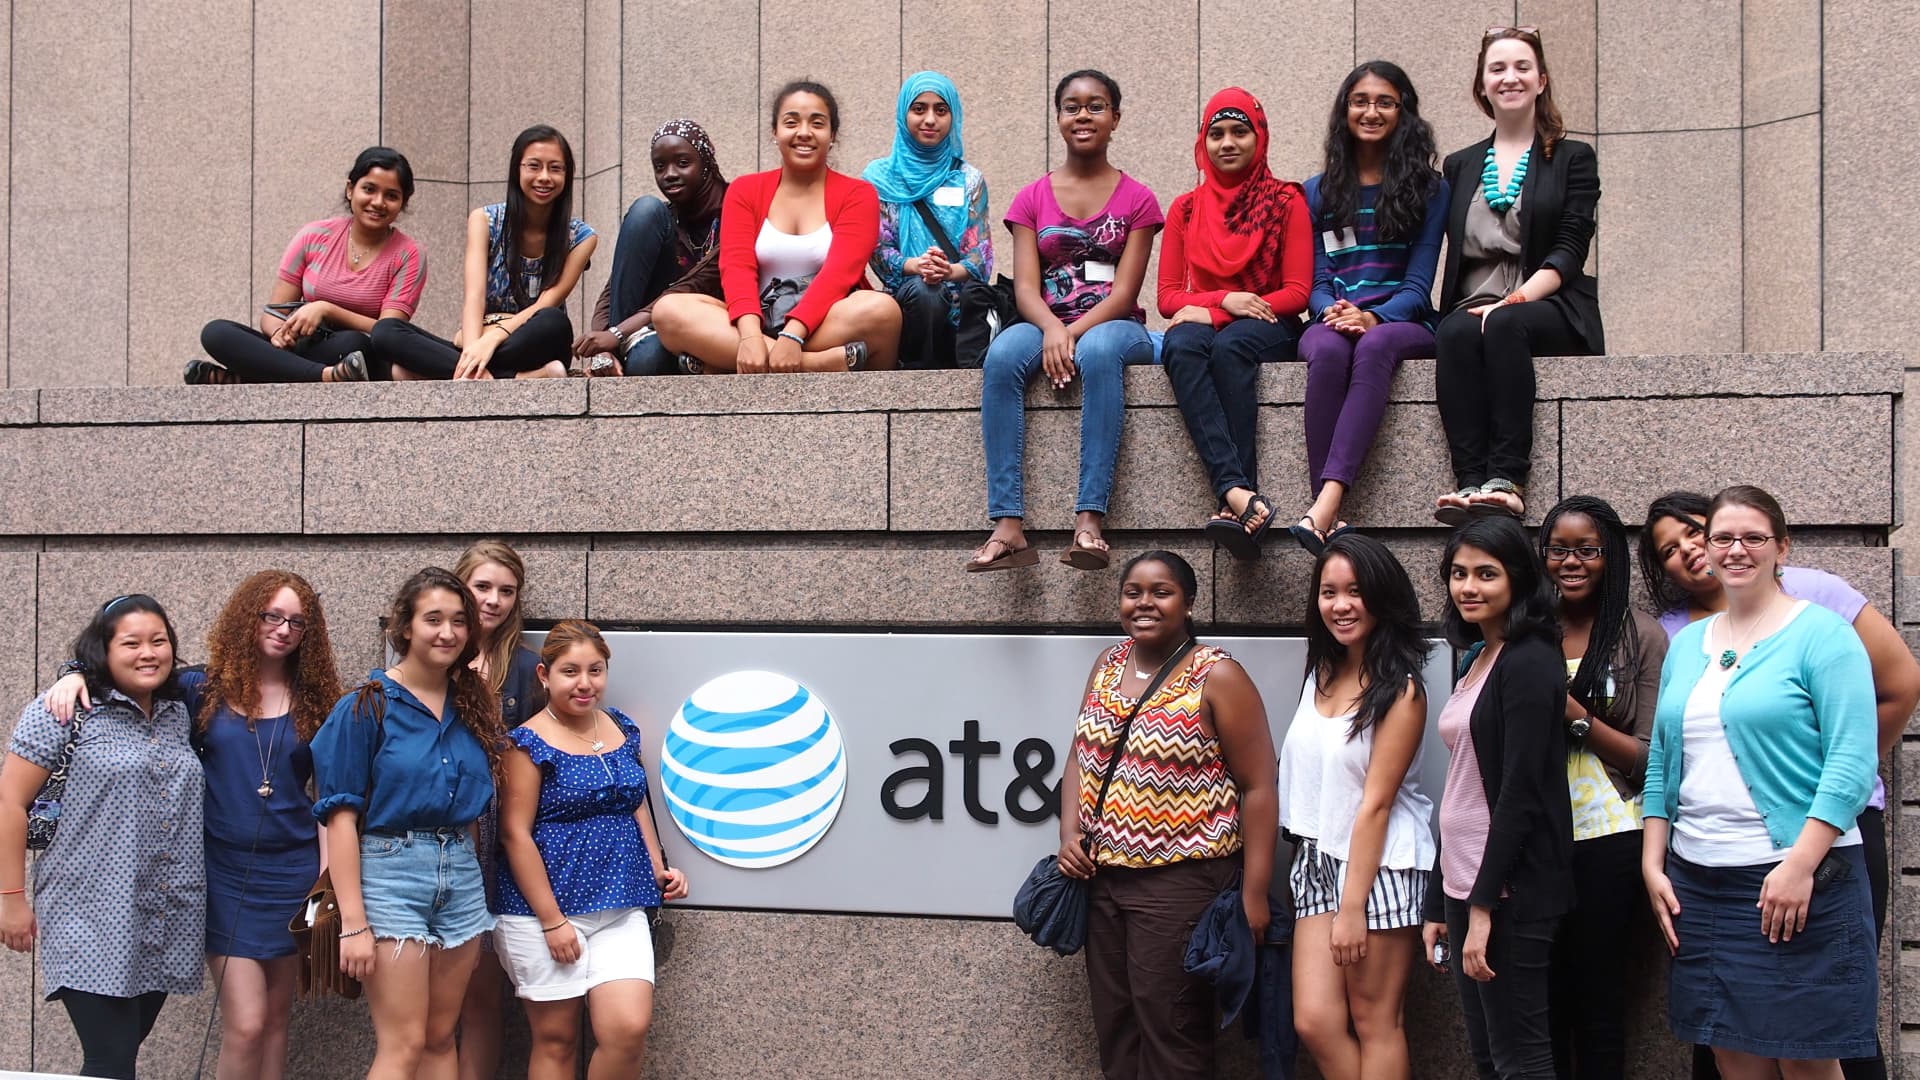 A group photo of the 20 participants in the first-ever Girls Who Code summer program in 2012 in New York City.